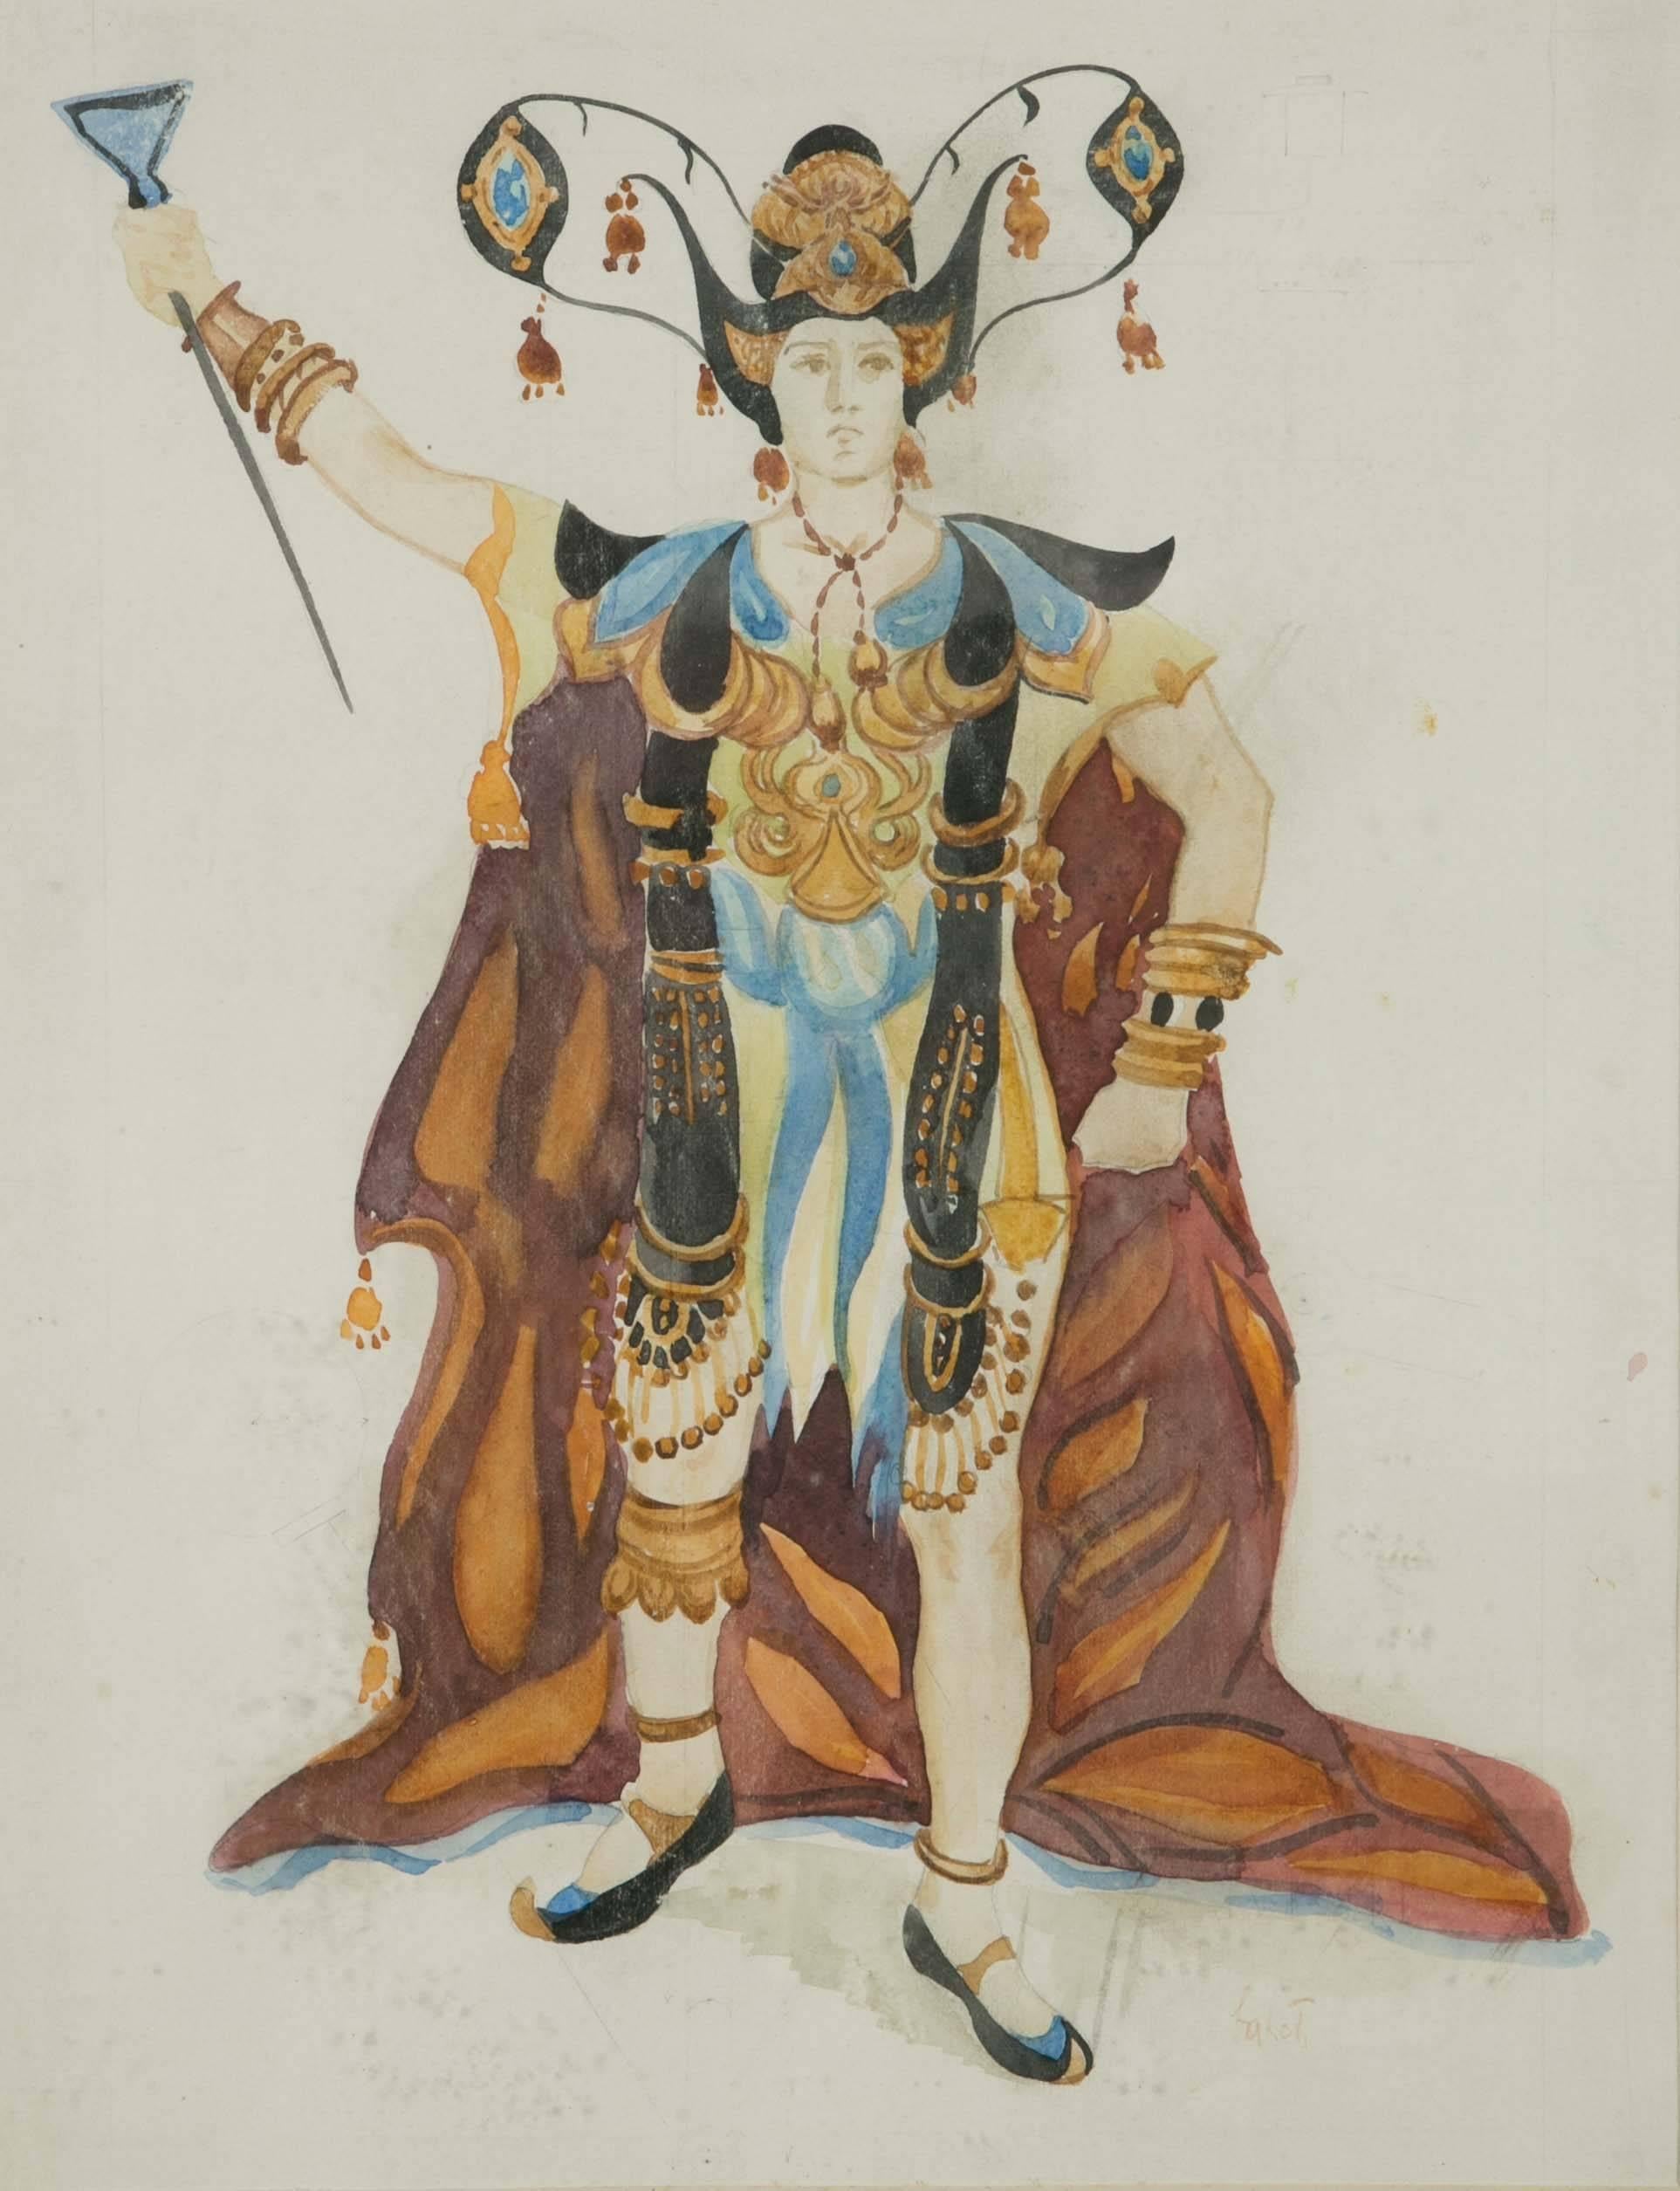 This watercolor is a theatre costume design by Leon Bakst (1866-1924). Bakst is the most famous and sought after theatre and ballet costume designer. In particular he designed most of the costumes for the 